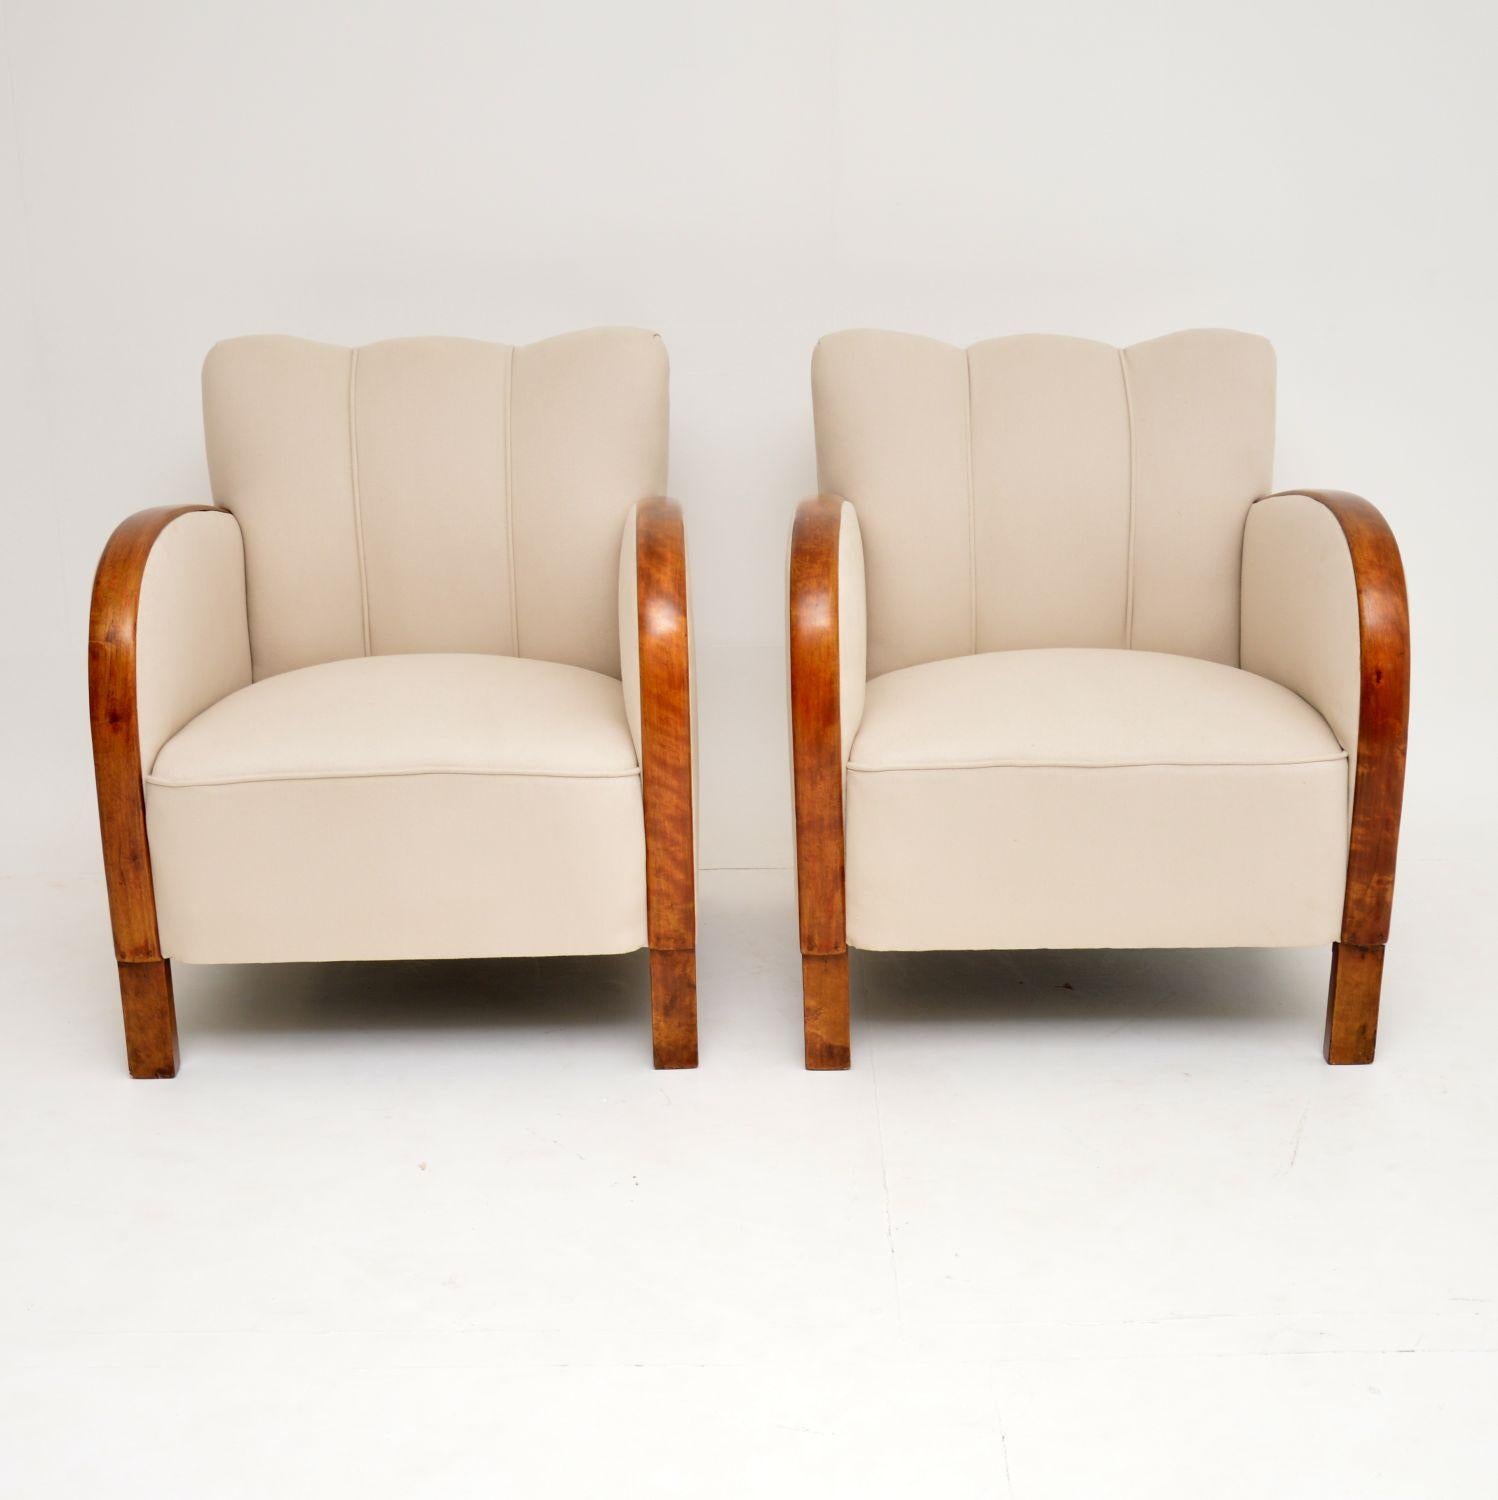 Very stylish pair of original Swedish Art Deco armchairs, dating from the 1930s and in excellent condition.

These chairs have just been brought over from Sweden, been French polished and re-upholstered in our regular natural cotton linen fabric.